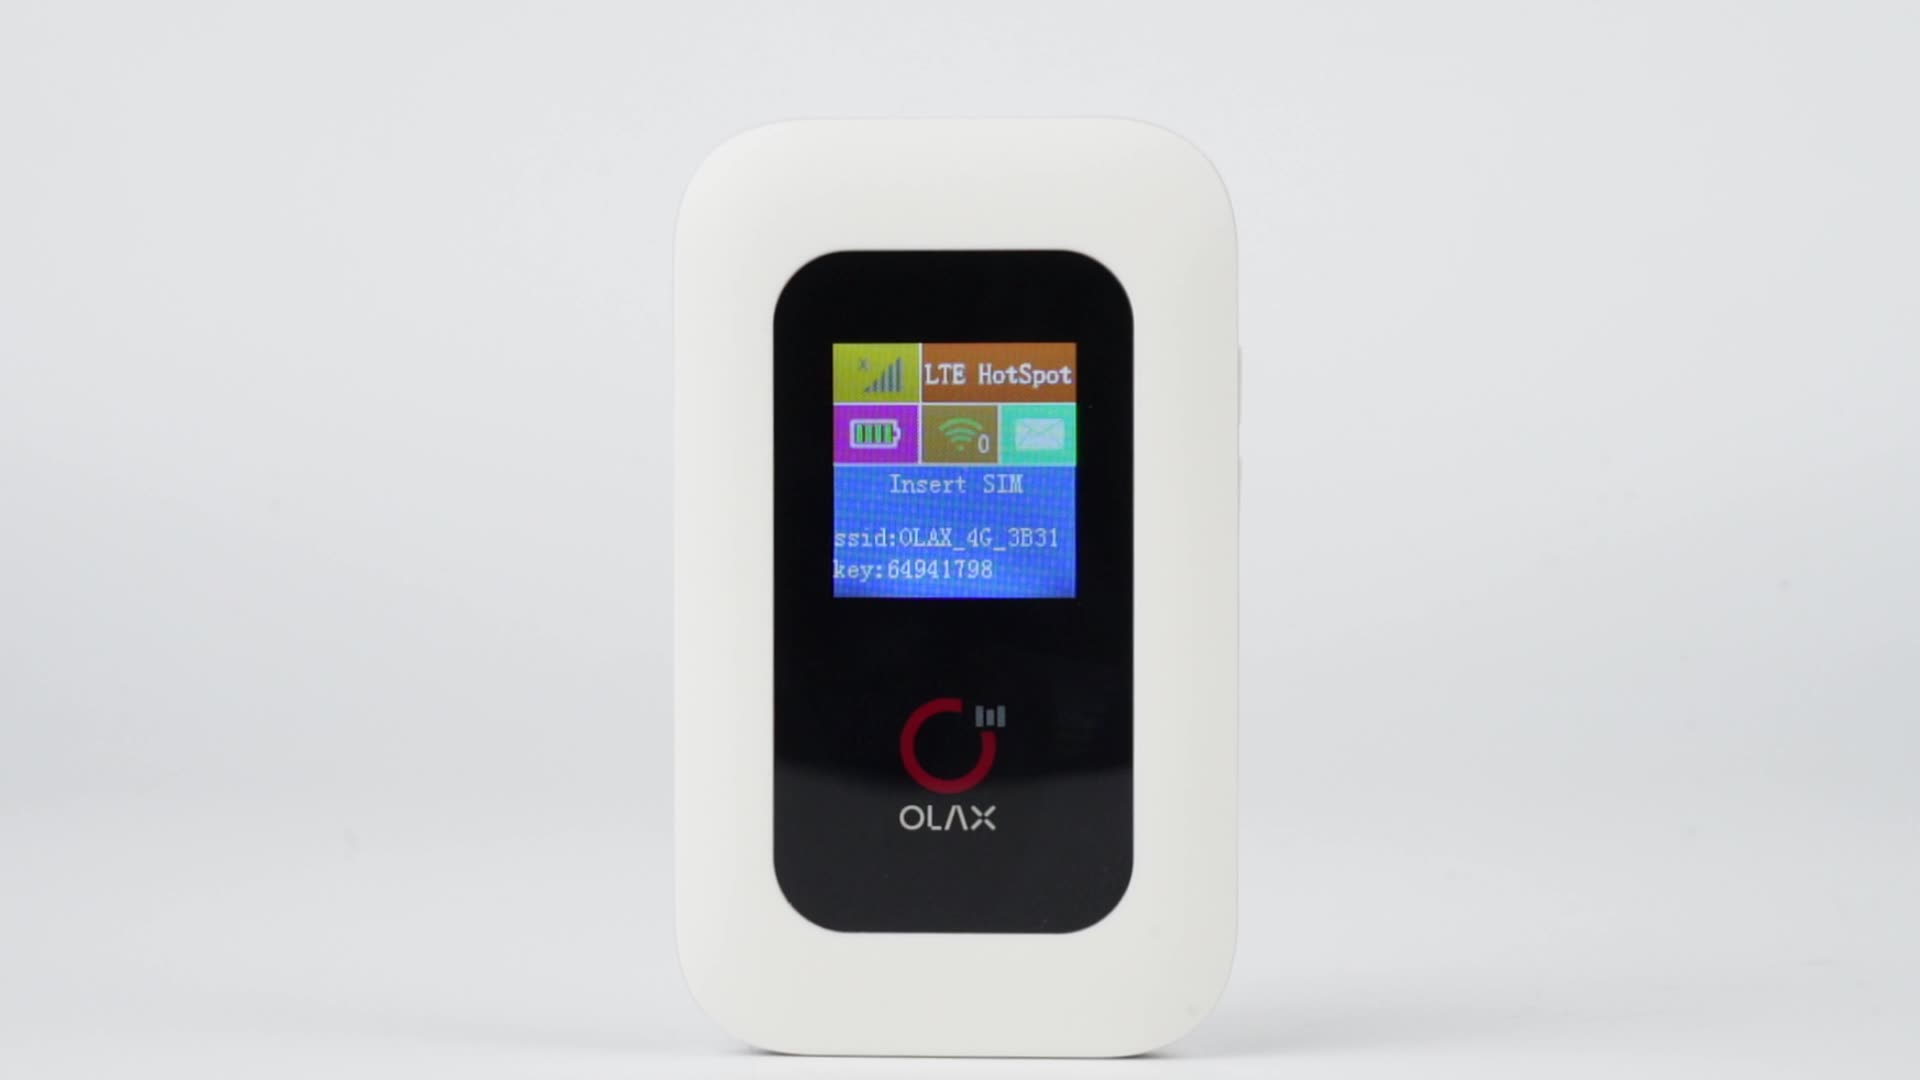 Olax Mf980l 4g 150mbps Wifi Router Hotspot Mifis With Lcd Support B1 B3 B5  B8 B38 B40 B41 Similar To Zte Mf923 - Buy 4g Hotspot,4g Wifi,Jio Product on  Alibaba.com